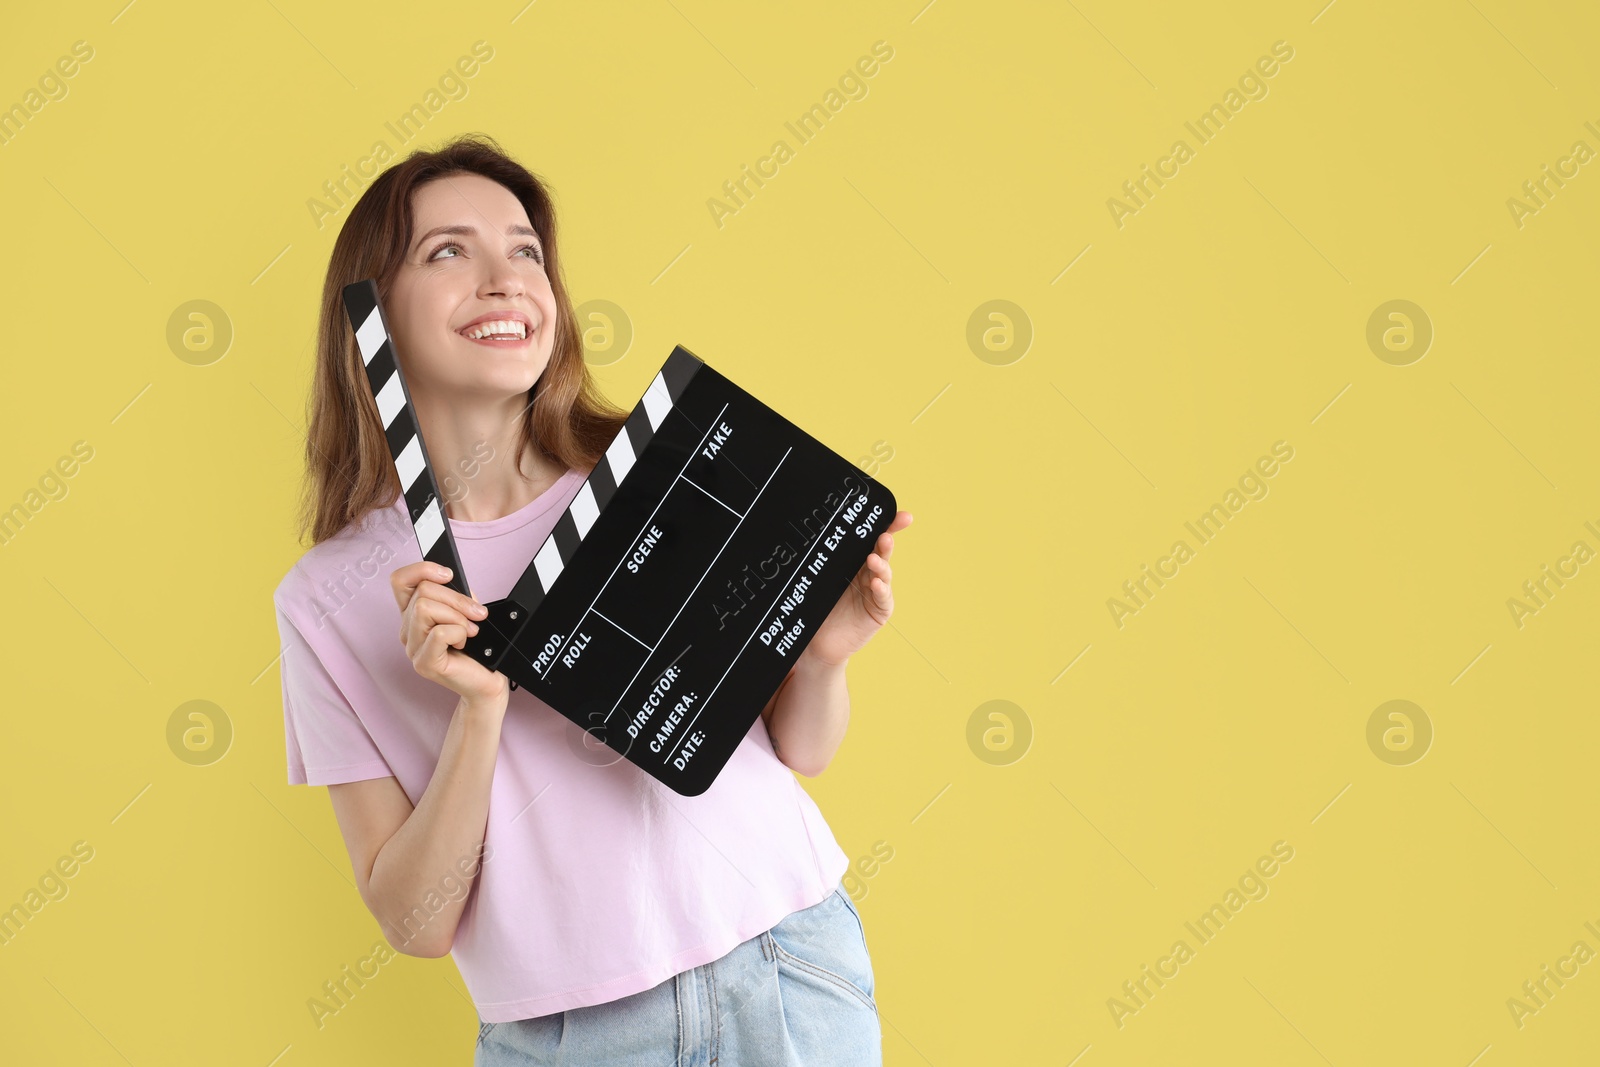 Photo of Making movie. Smiling woman with clapperboard on yellow background. Space for text